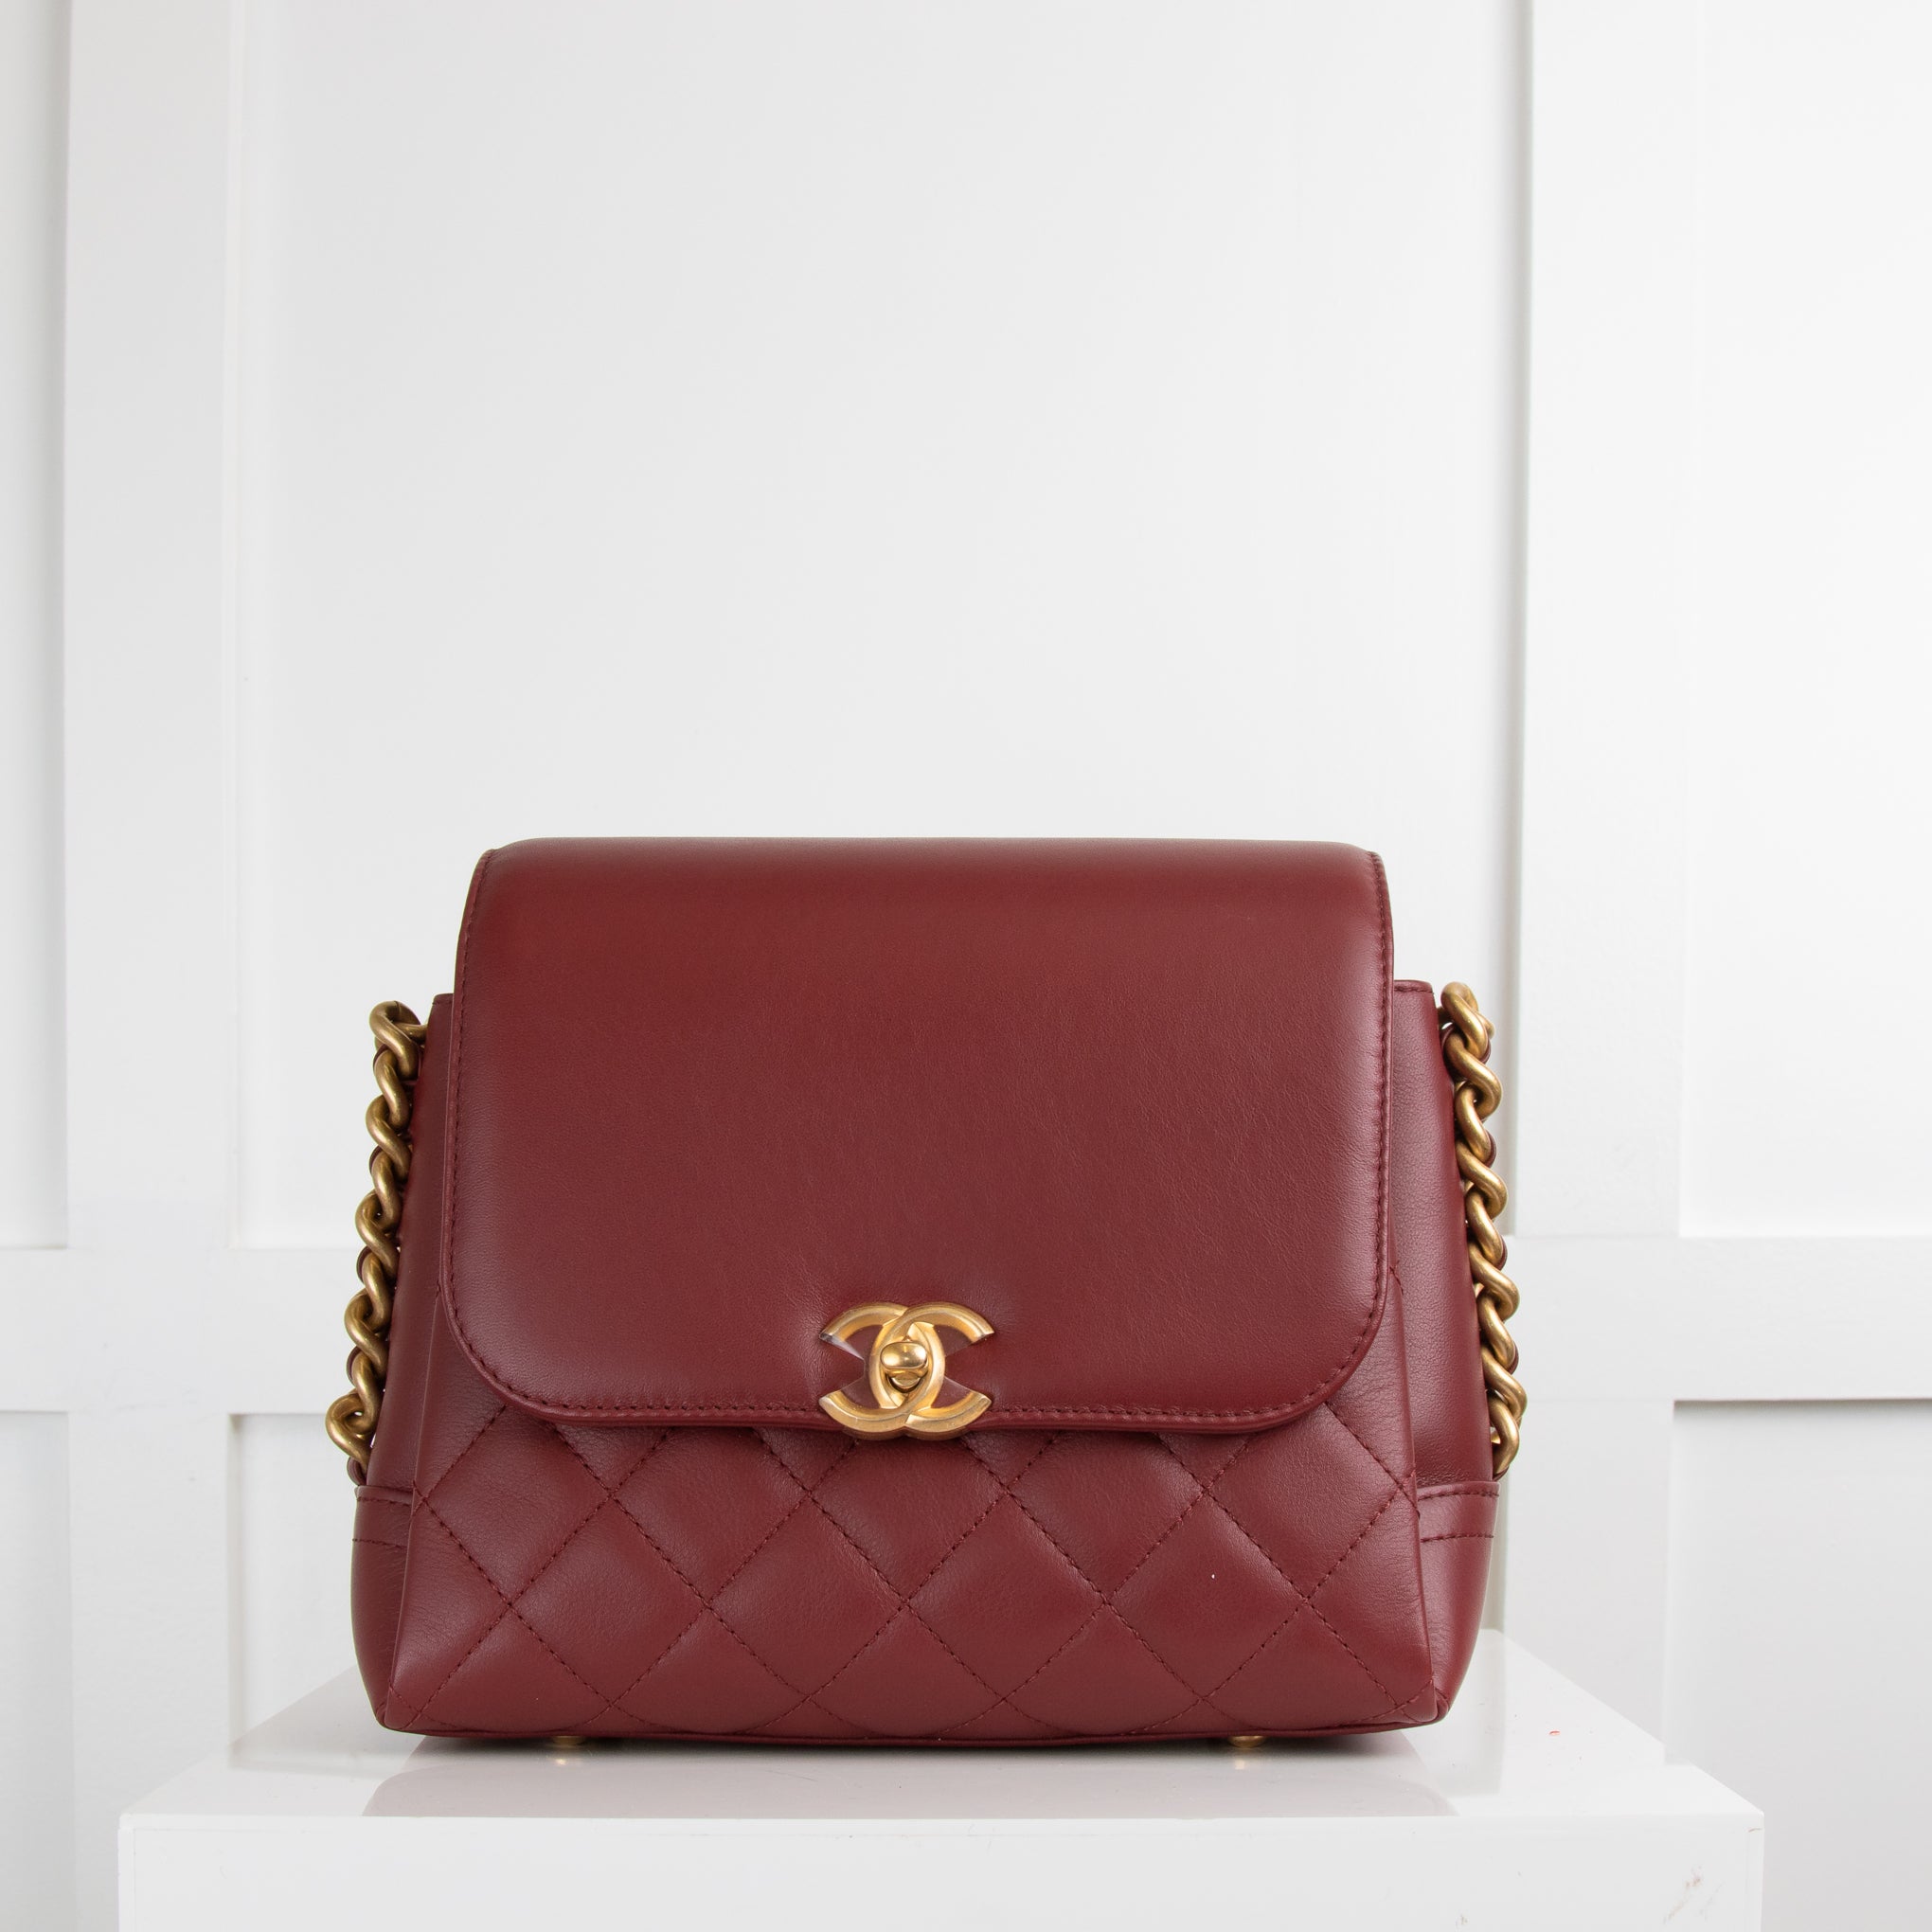 CHANEL Jumbo Quilted Burgundy Flap Bag